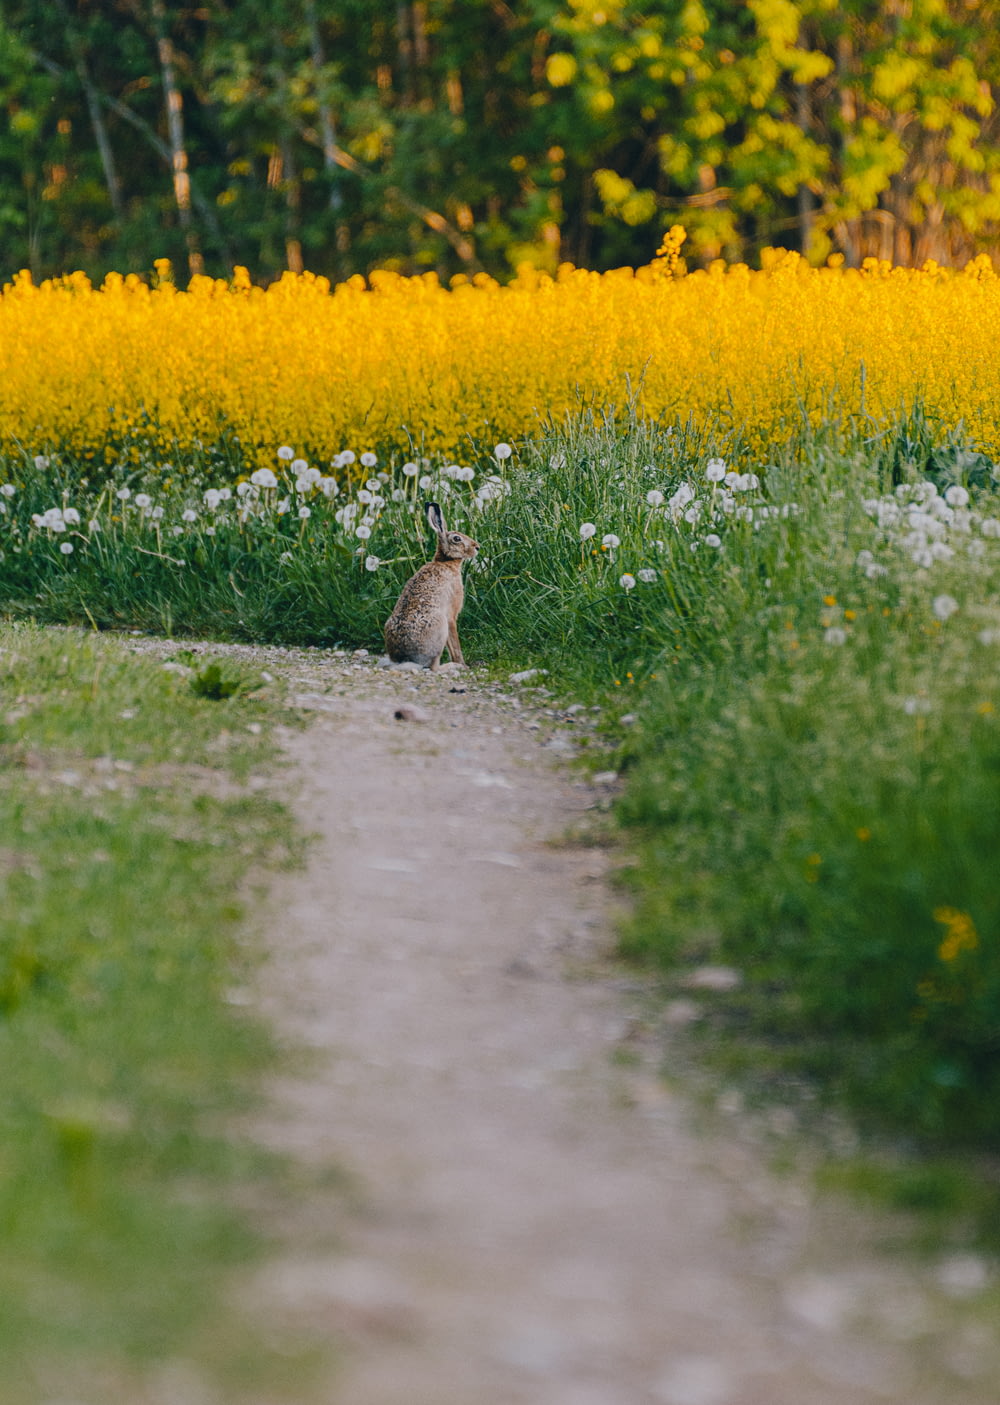 brown rabbit on green grass field beside river during daytime